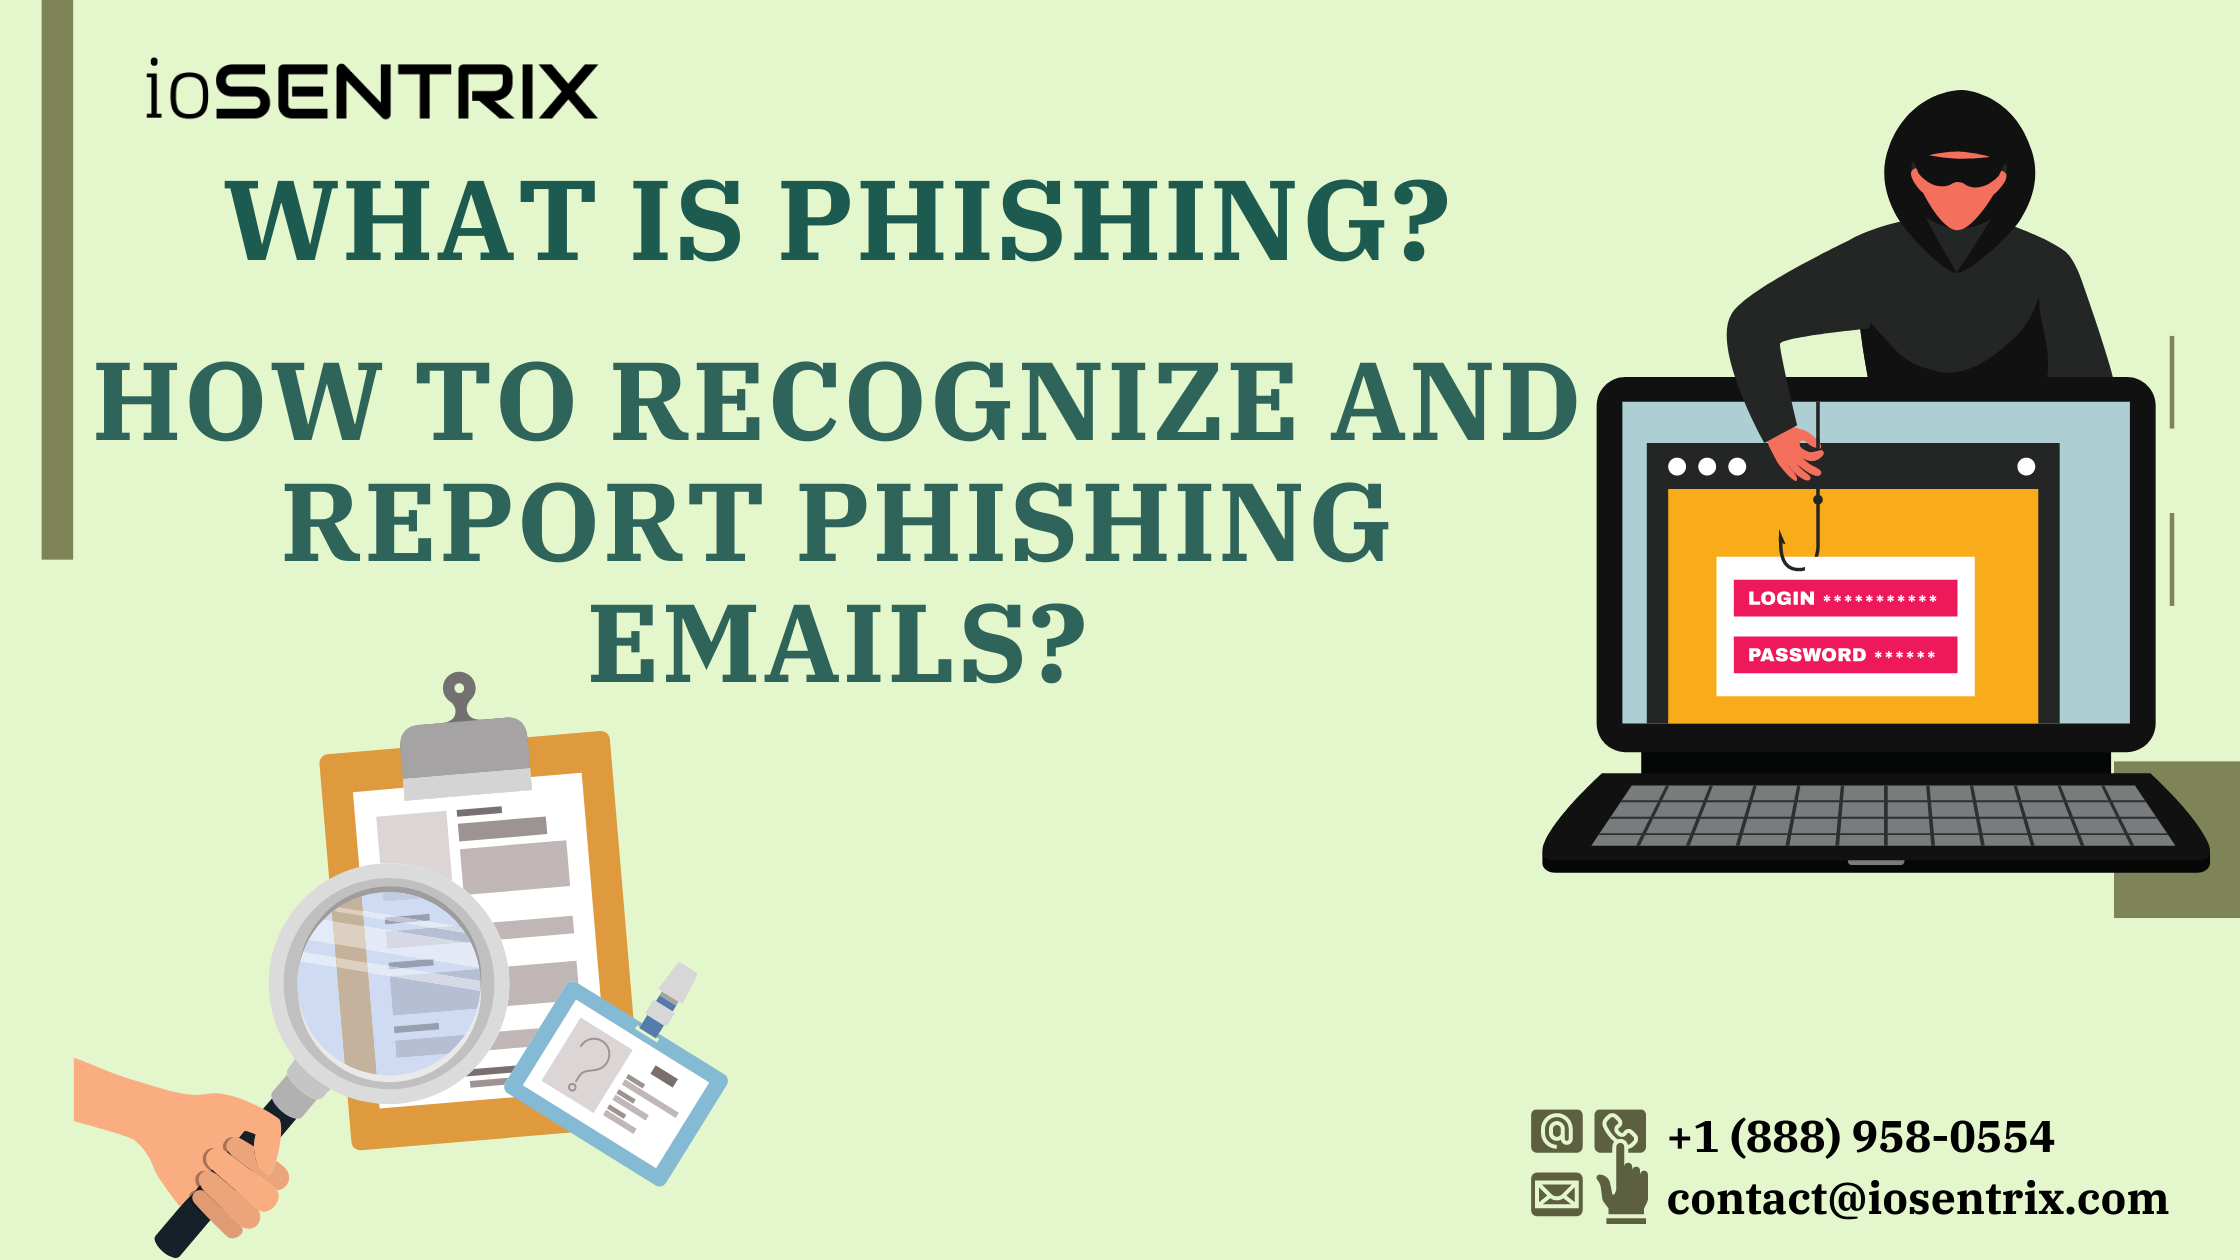 What is phishing? How to recognize and report phishing emails?